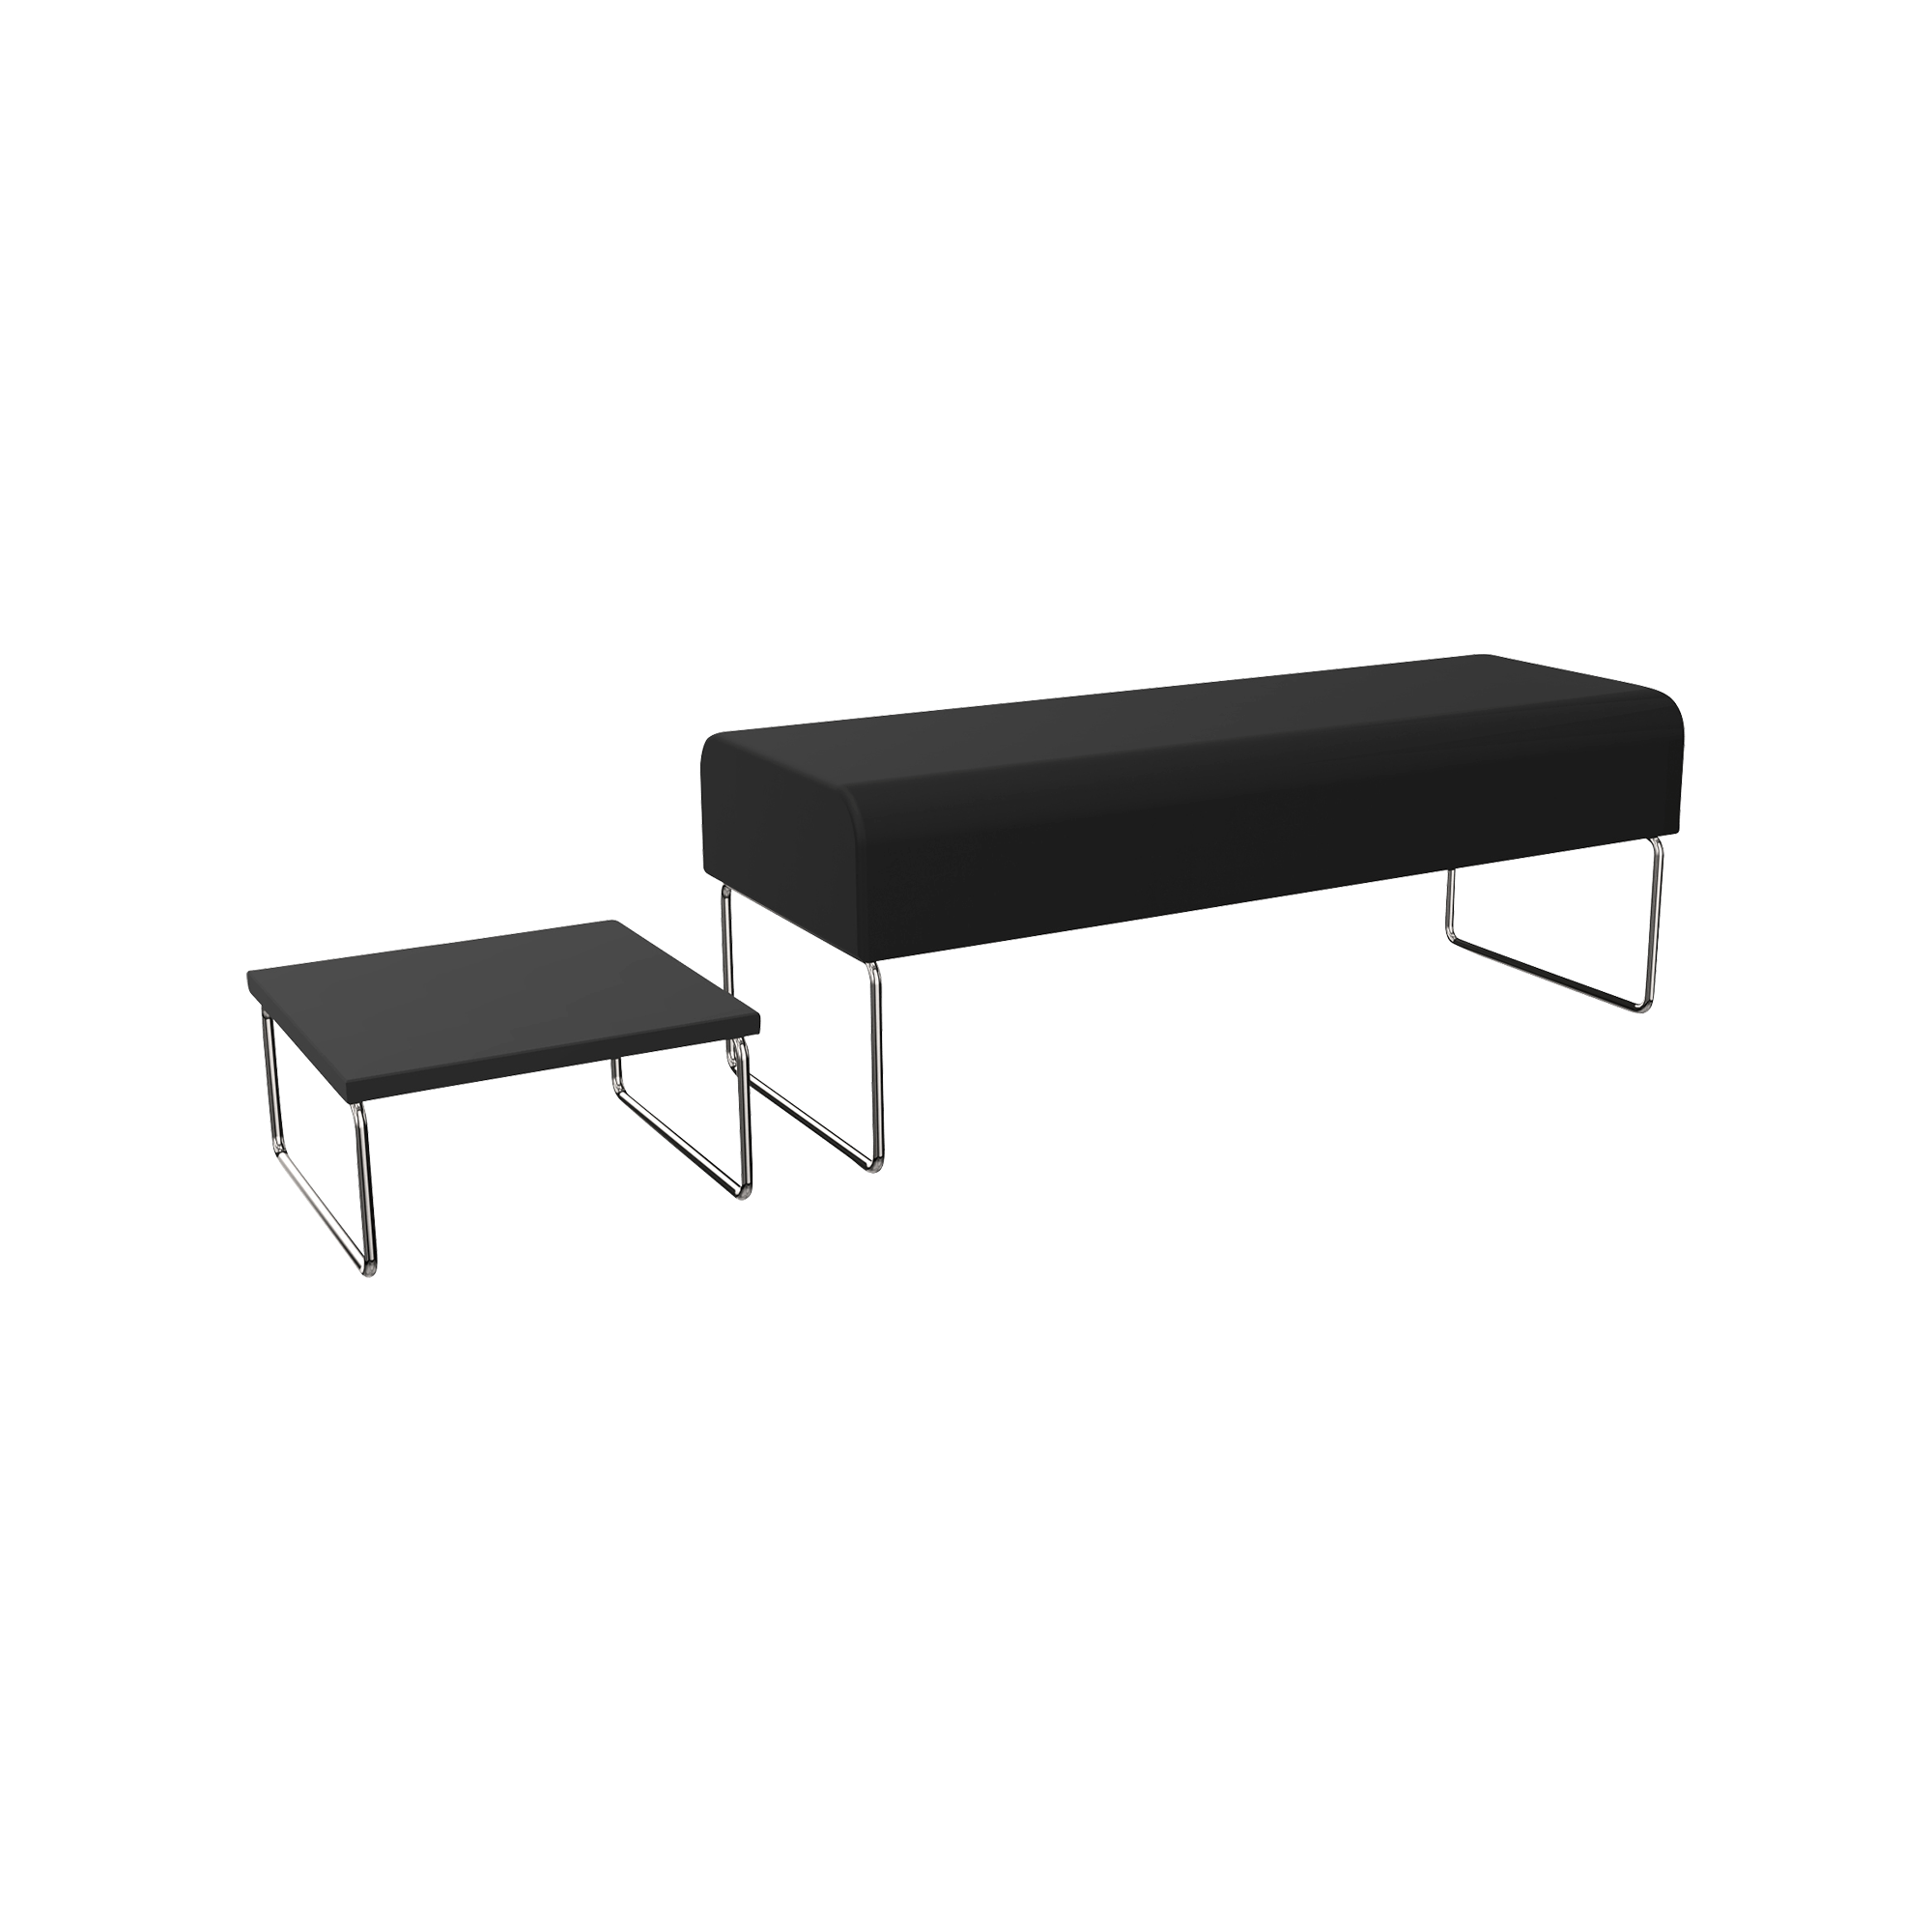 A black bench and stool